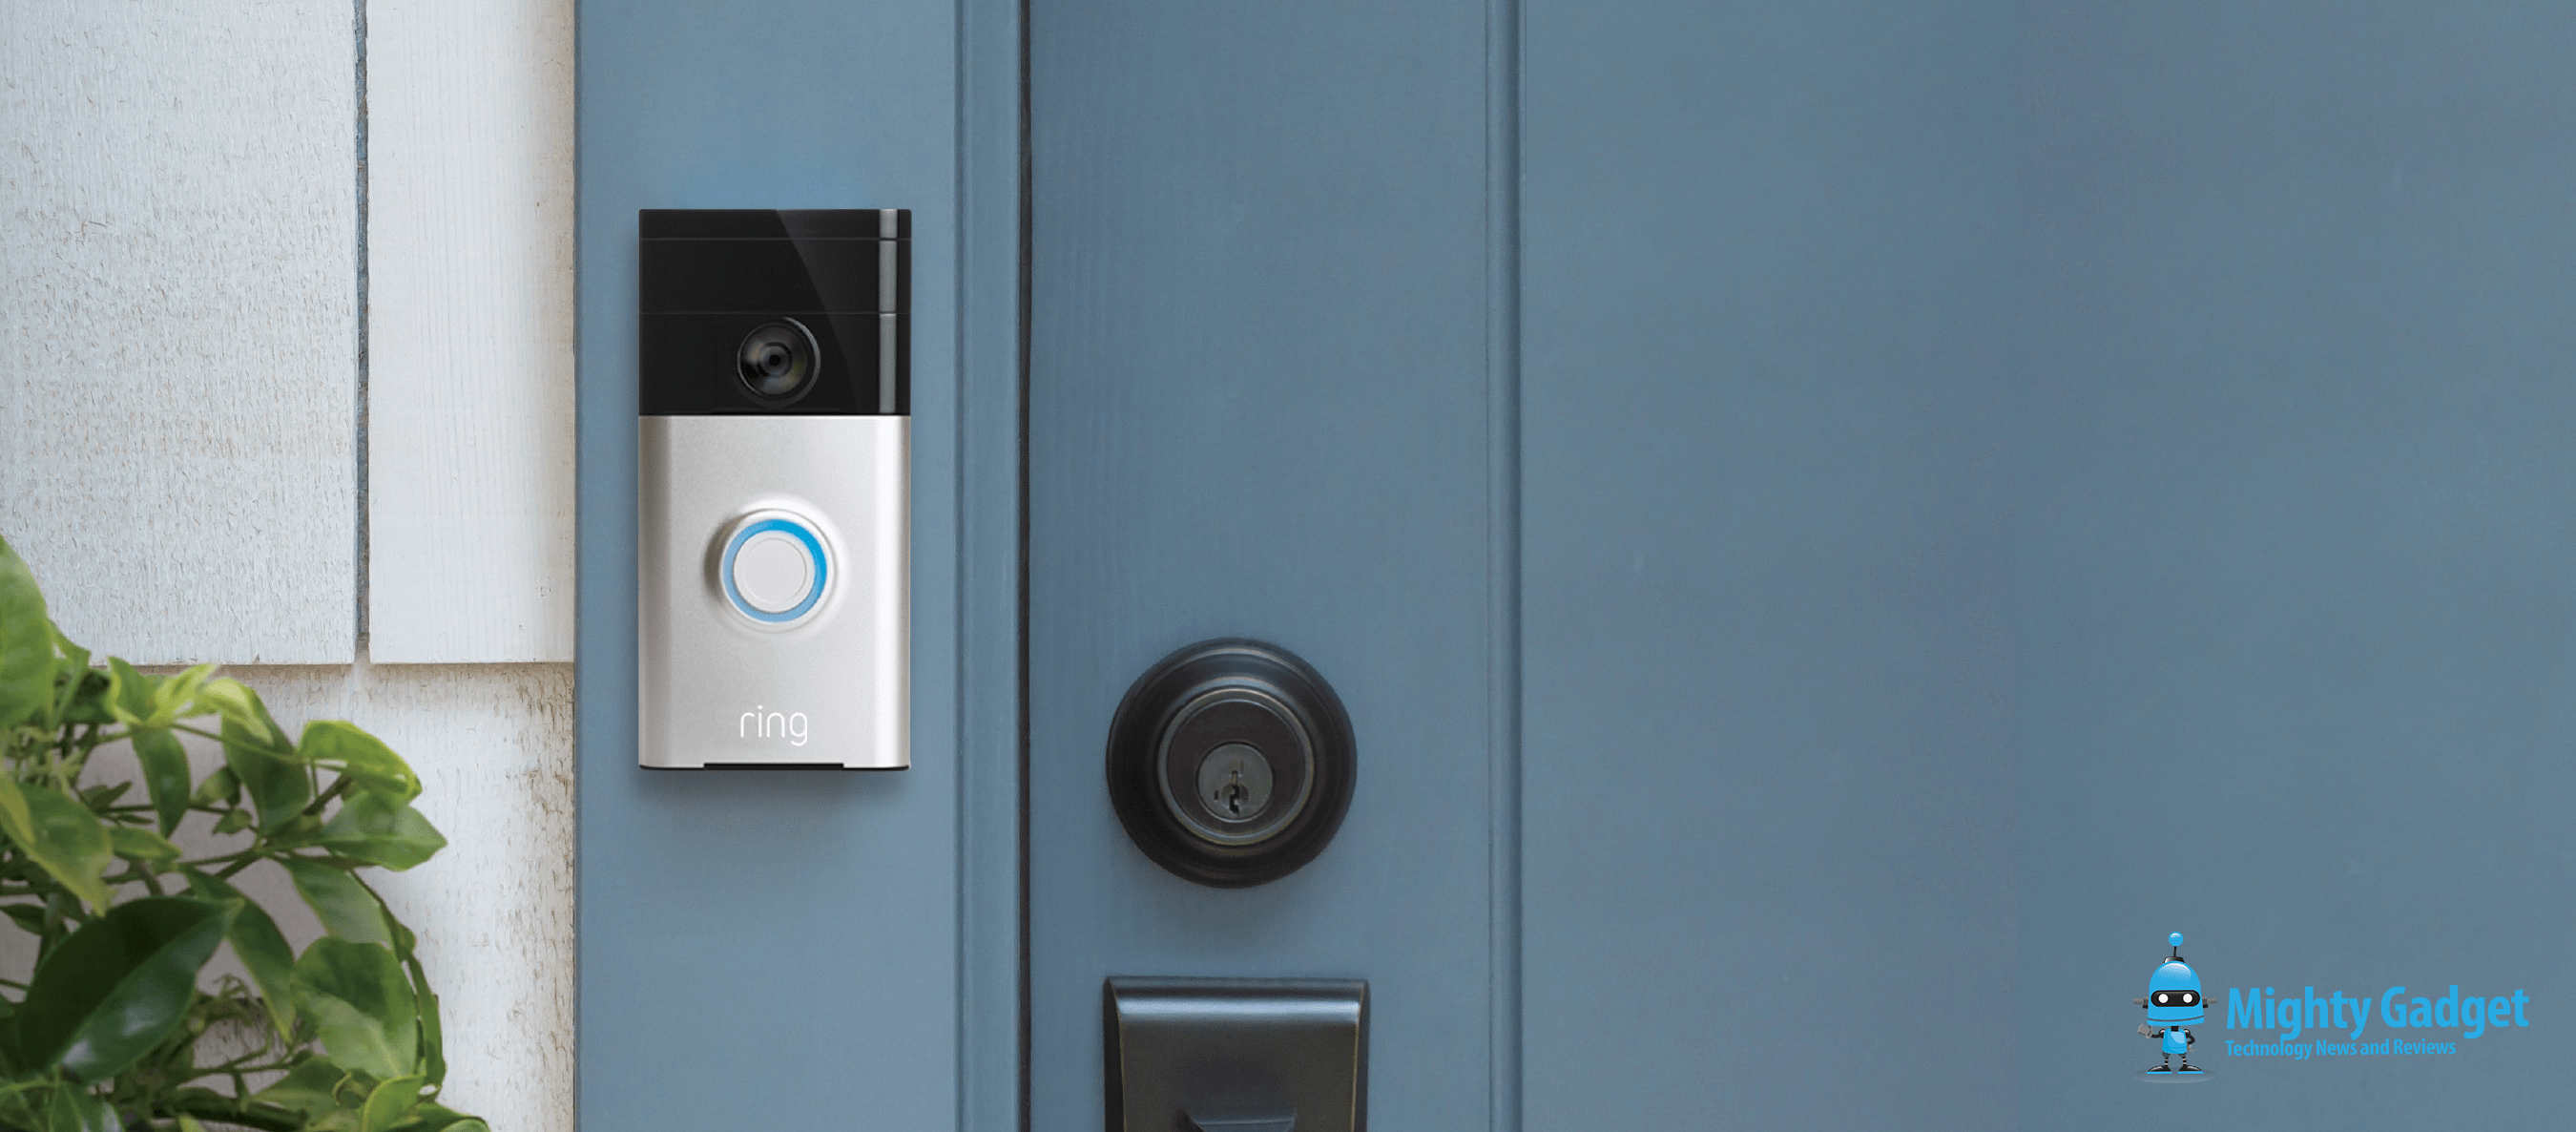 How to improve your WiFi signal for Ring Video Doorbell, Eufy & Arlo to stop delayed alerts / lagging